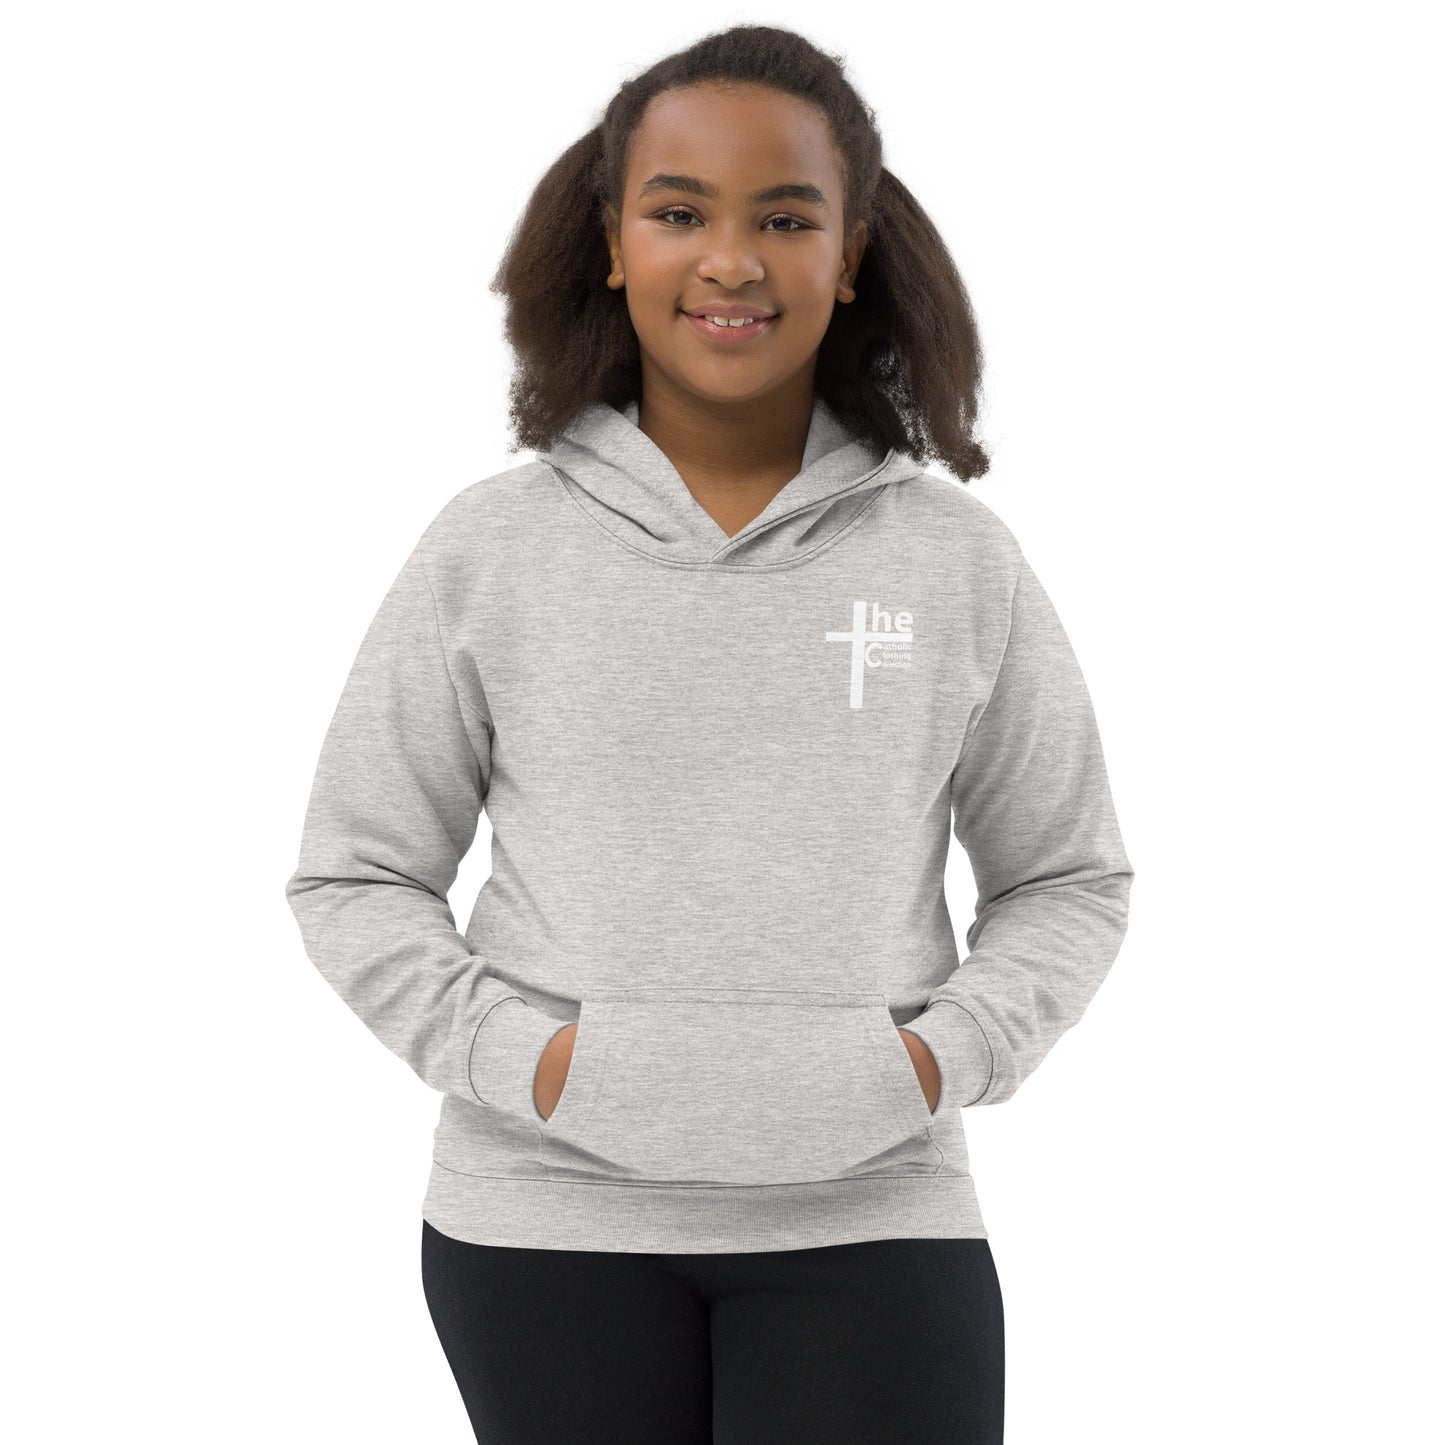 Our Lady of Fatima Pray for Us Children's Hoodie